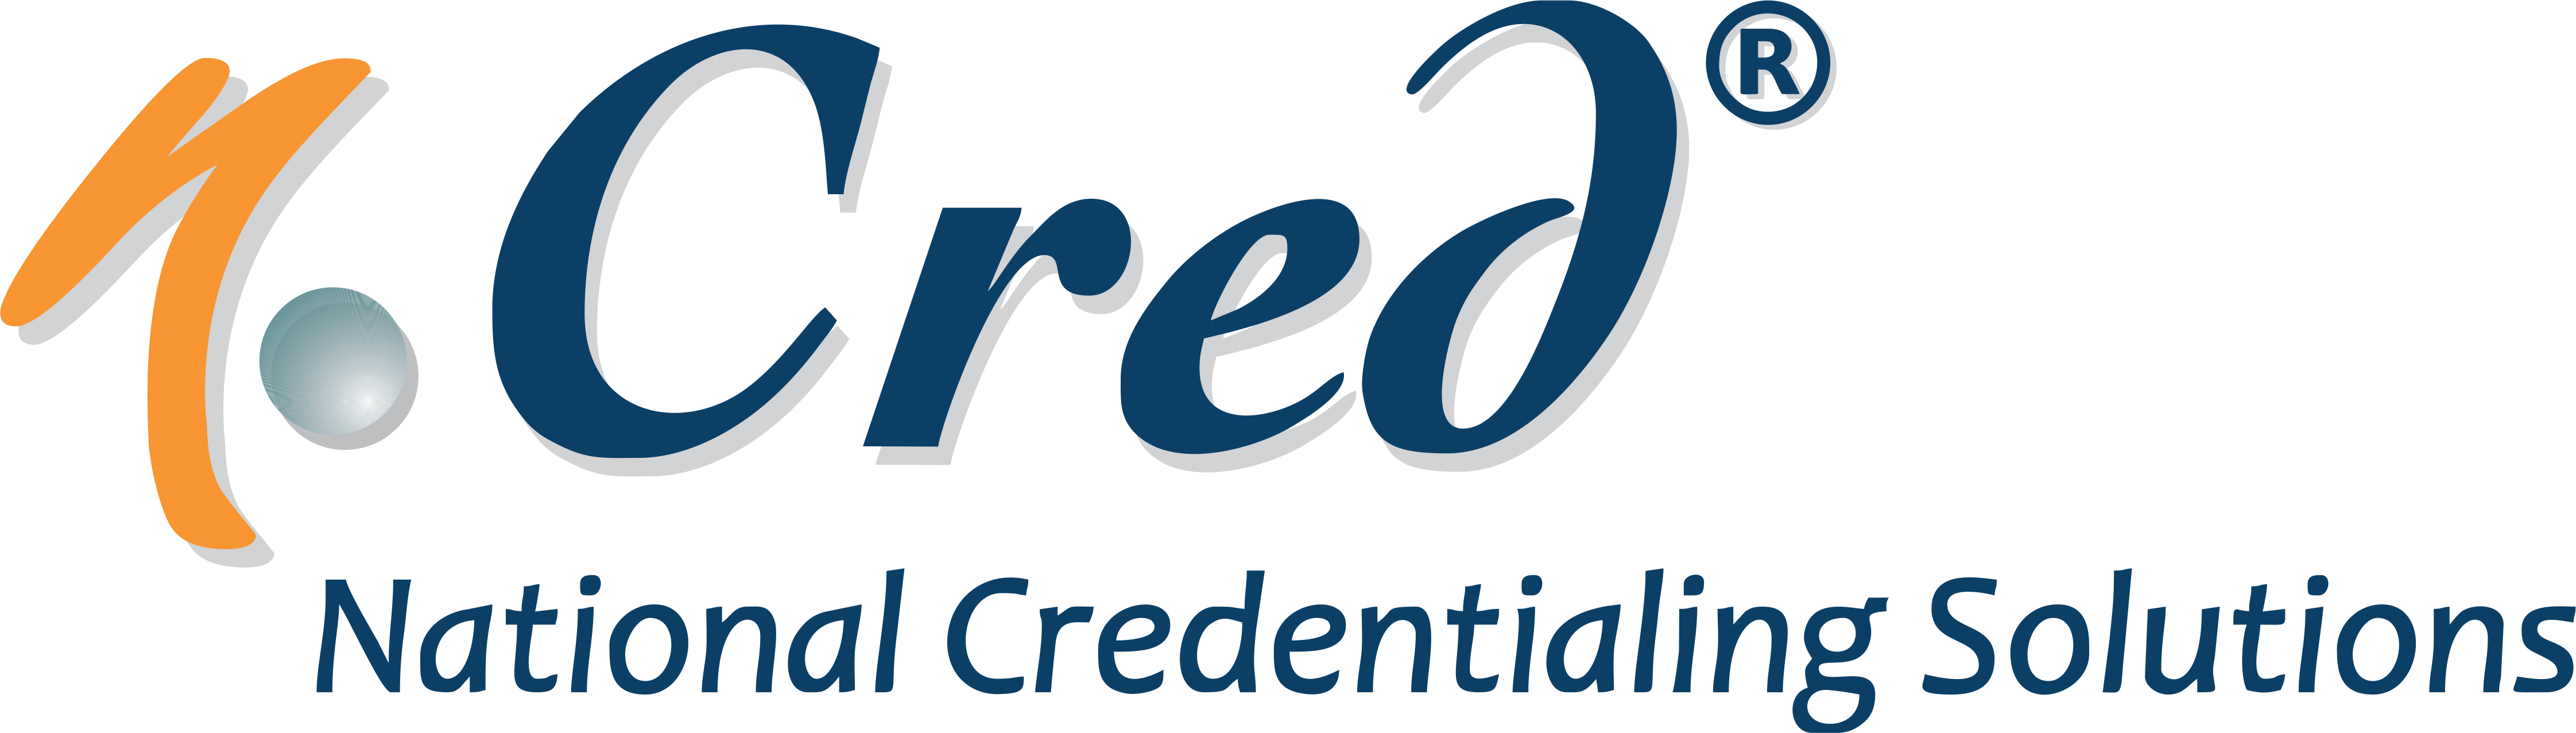 Credentialing Services Archives - Leading Medical Billing Services - USA